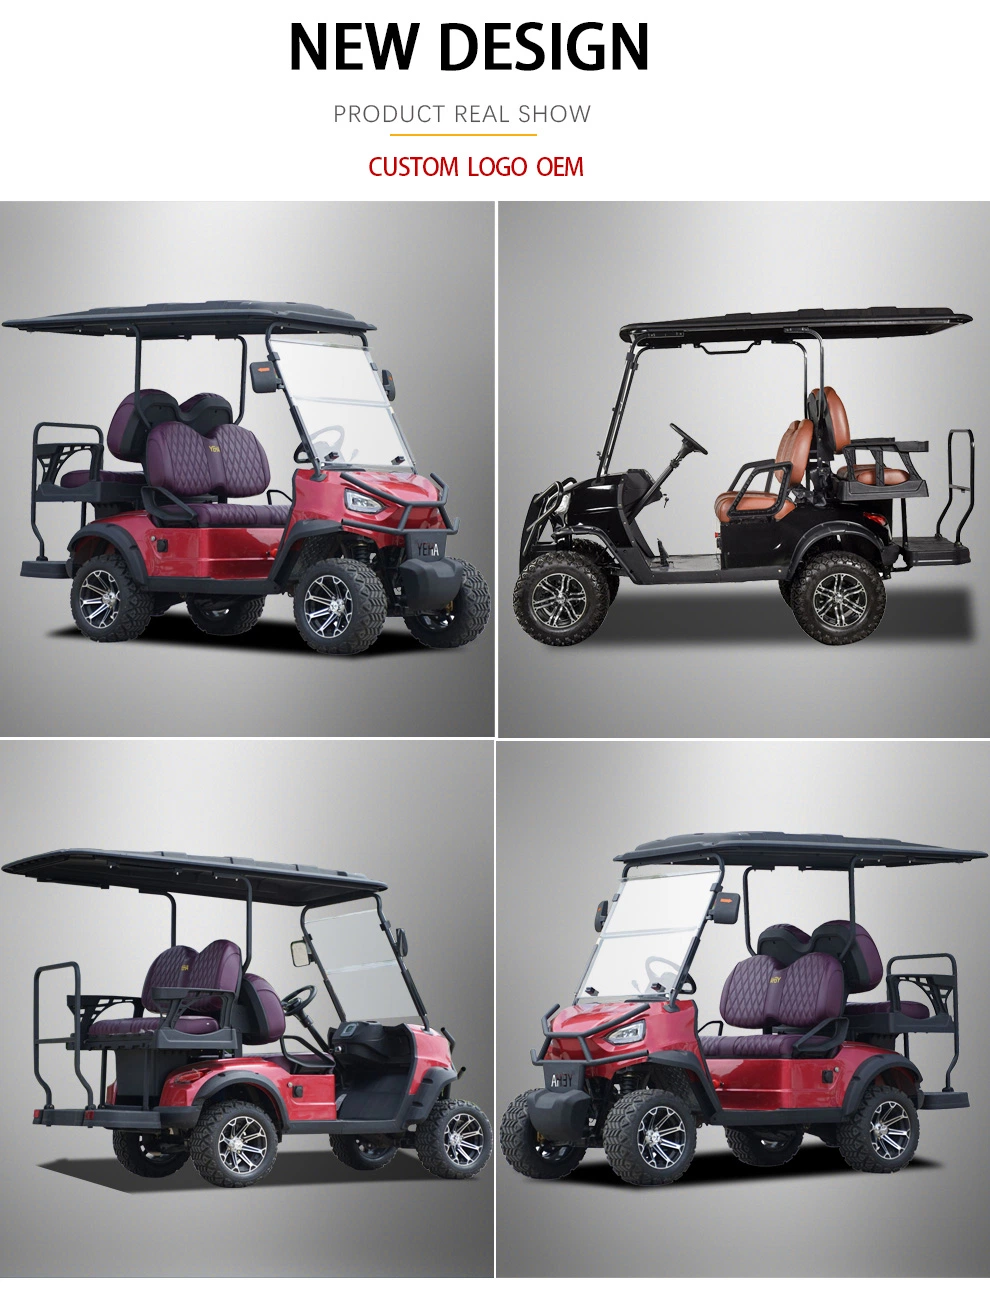 Lsv Golf Cart with Lithium Battery 4 Seater Golf Carts Newest Golf Cart